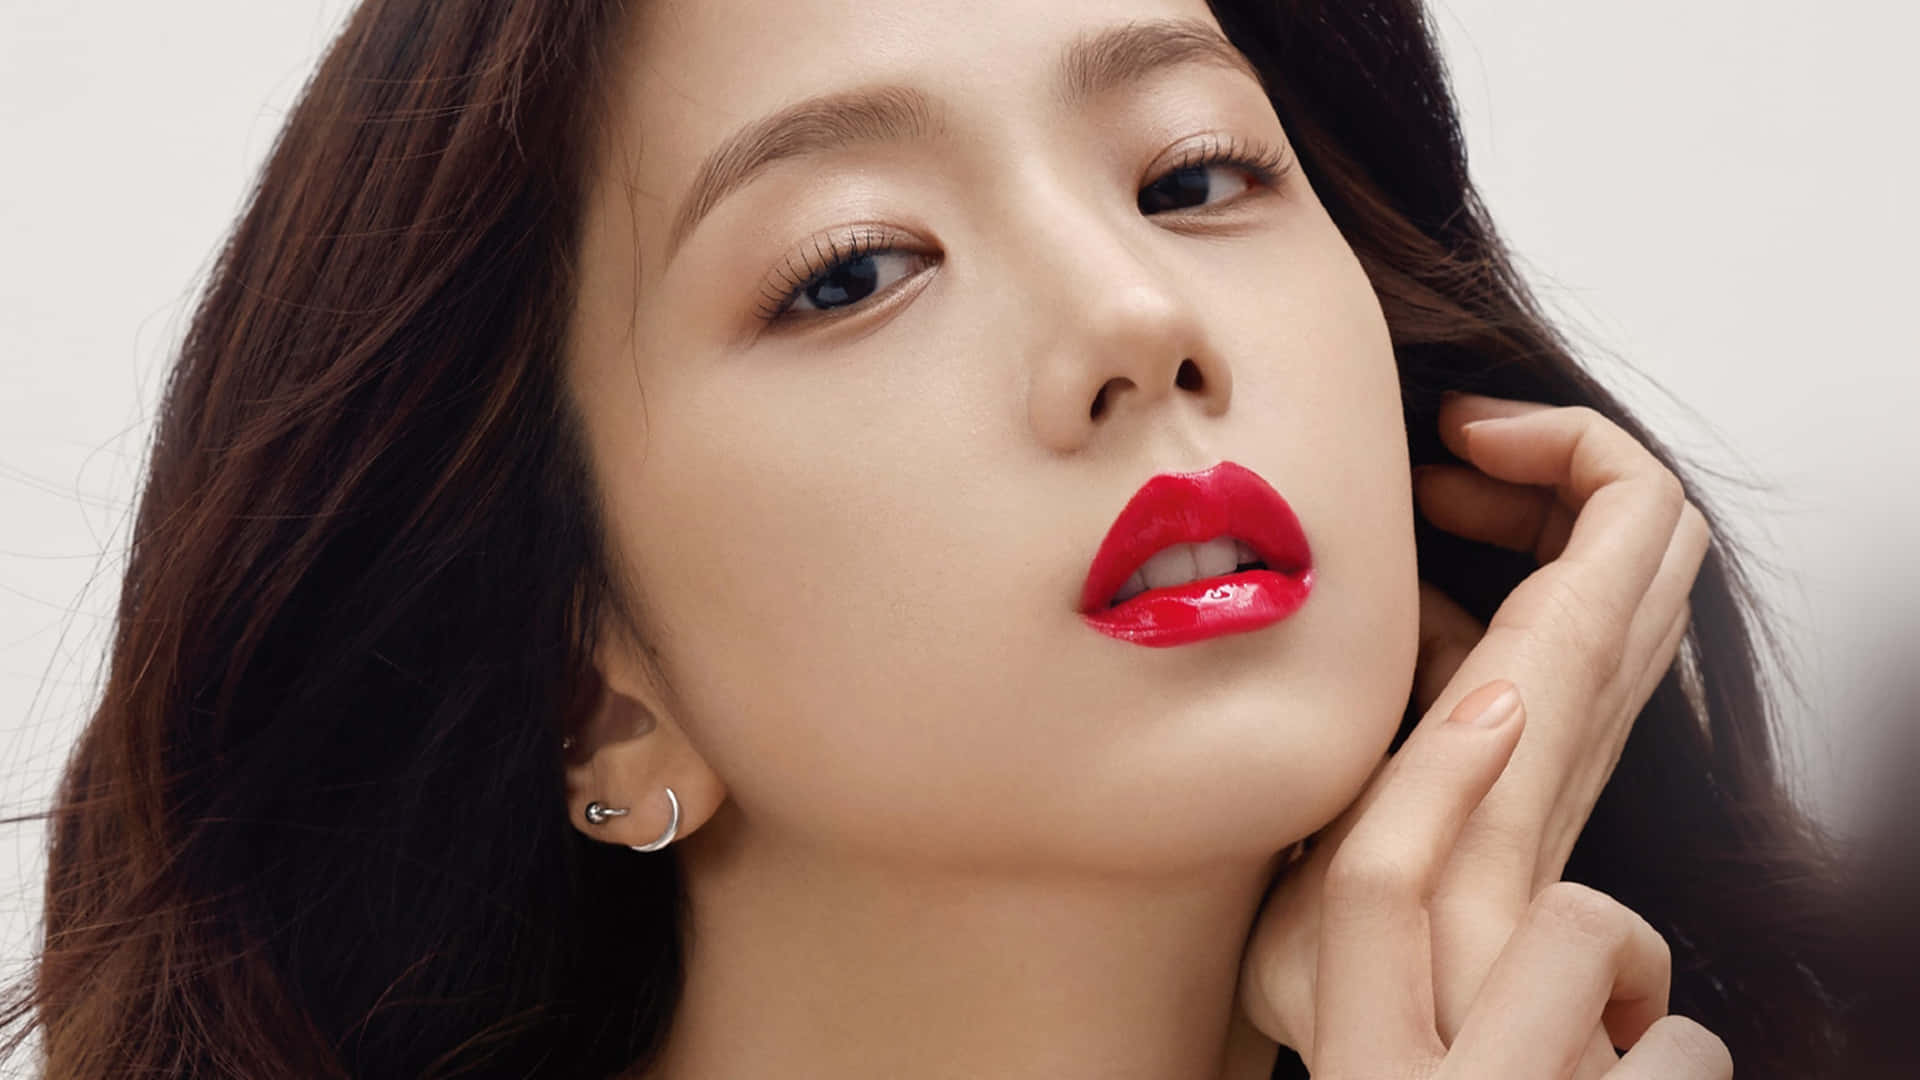 8 Candid Photos of Jisoo BLACKPINK in the Latest Photoshoot with Alo, She's  So Beautiful!